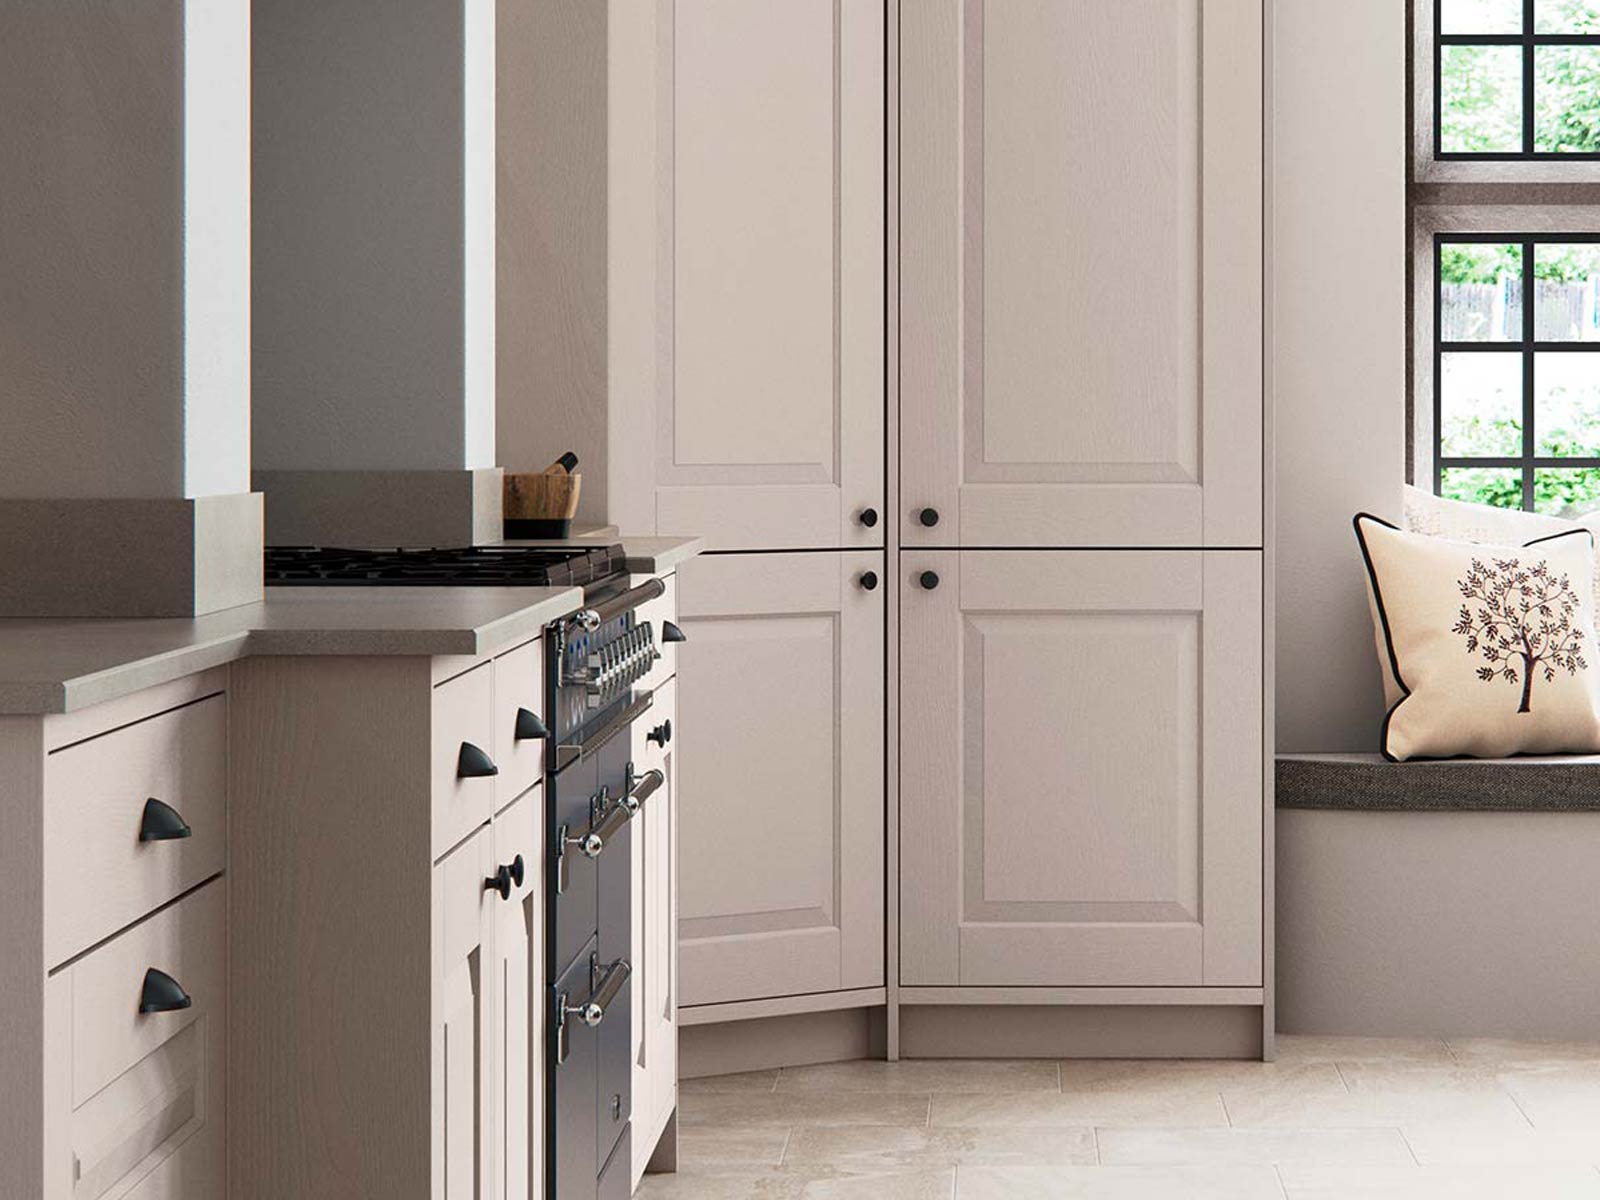 A corner pantry for kitchens characterised by a classic kitchen design